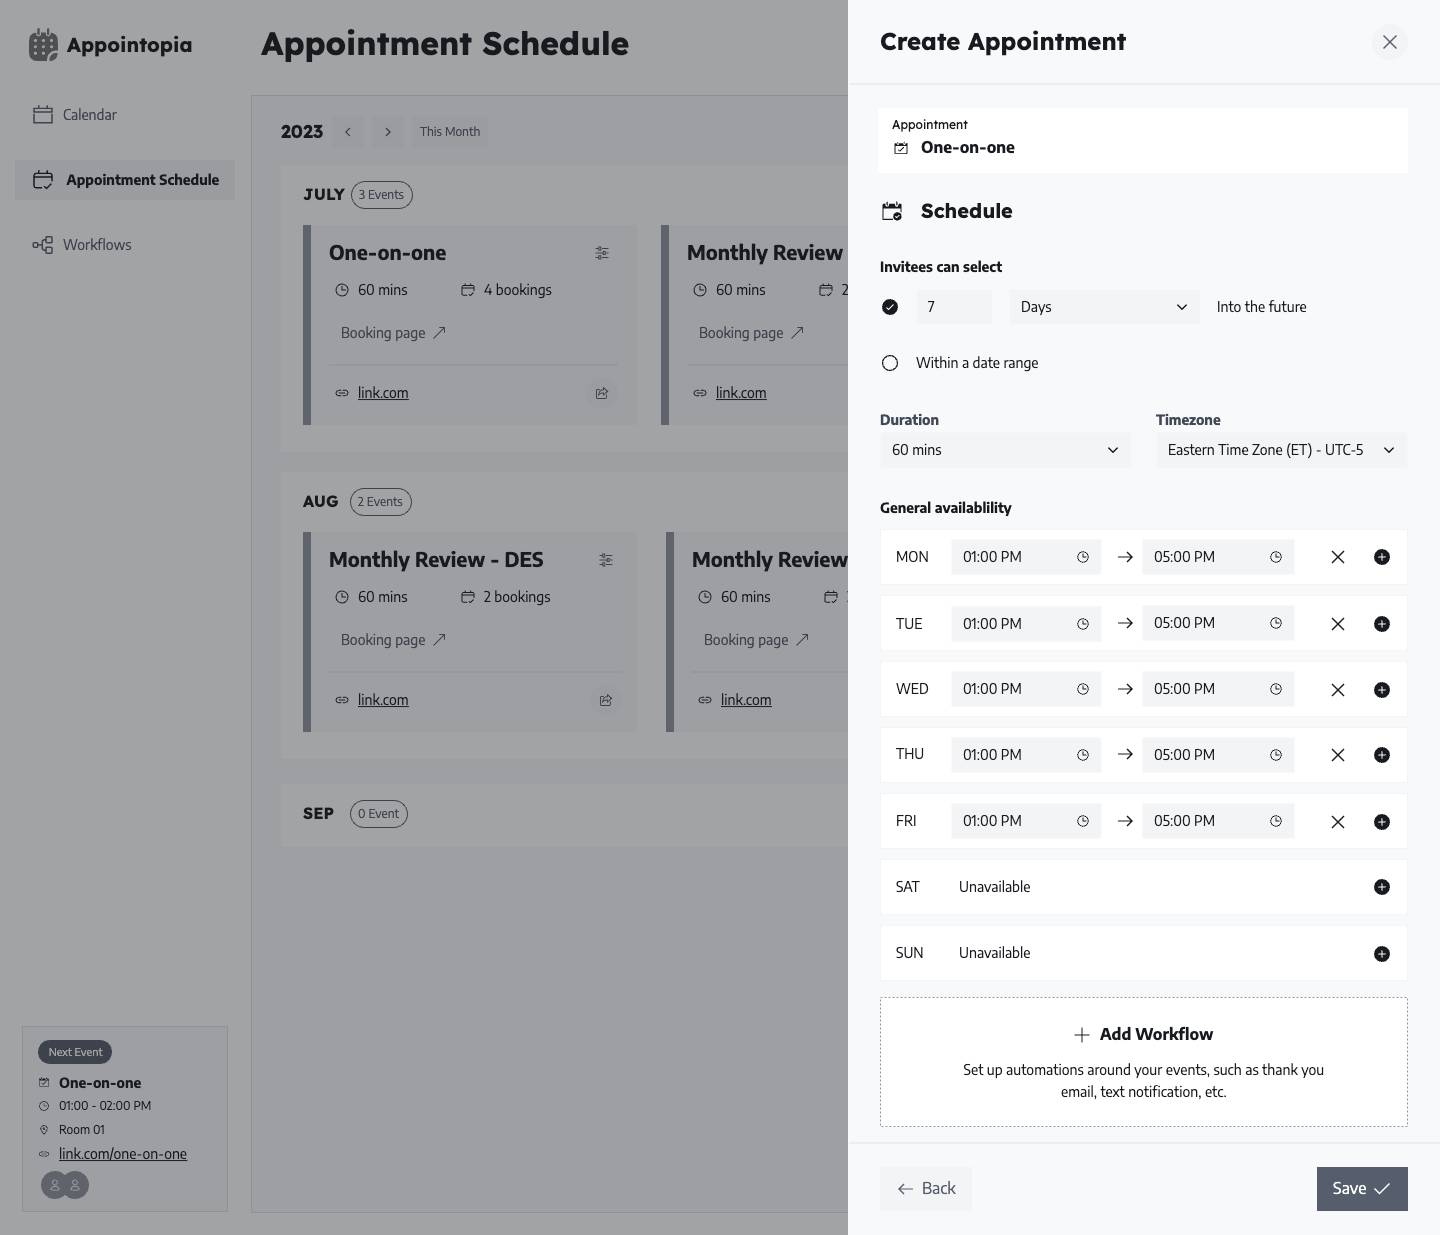 Create an appointment - Available schedules